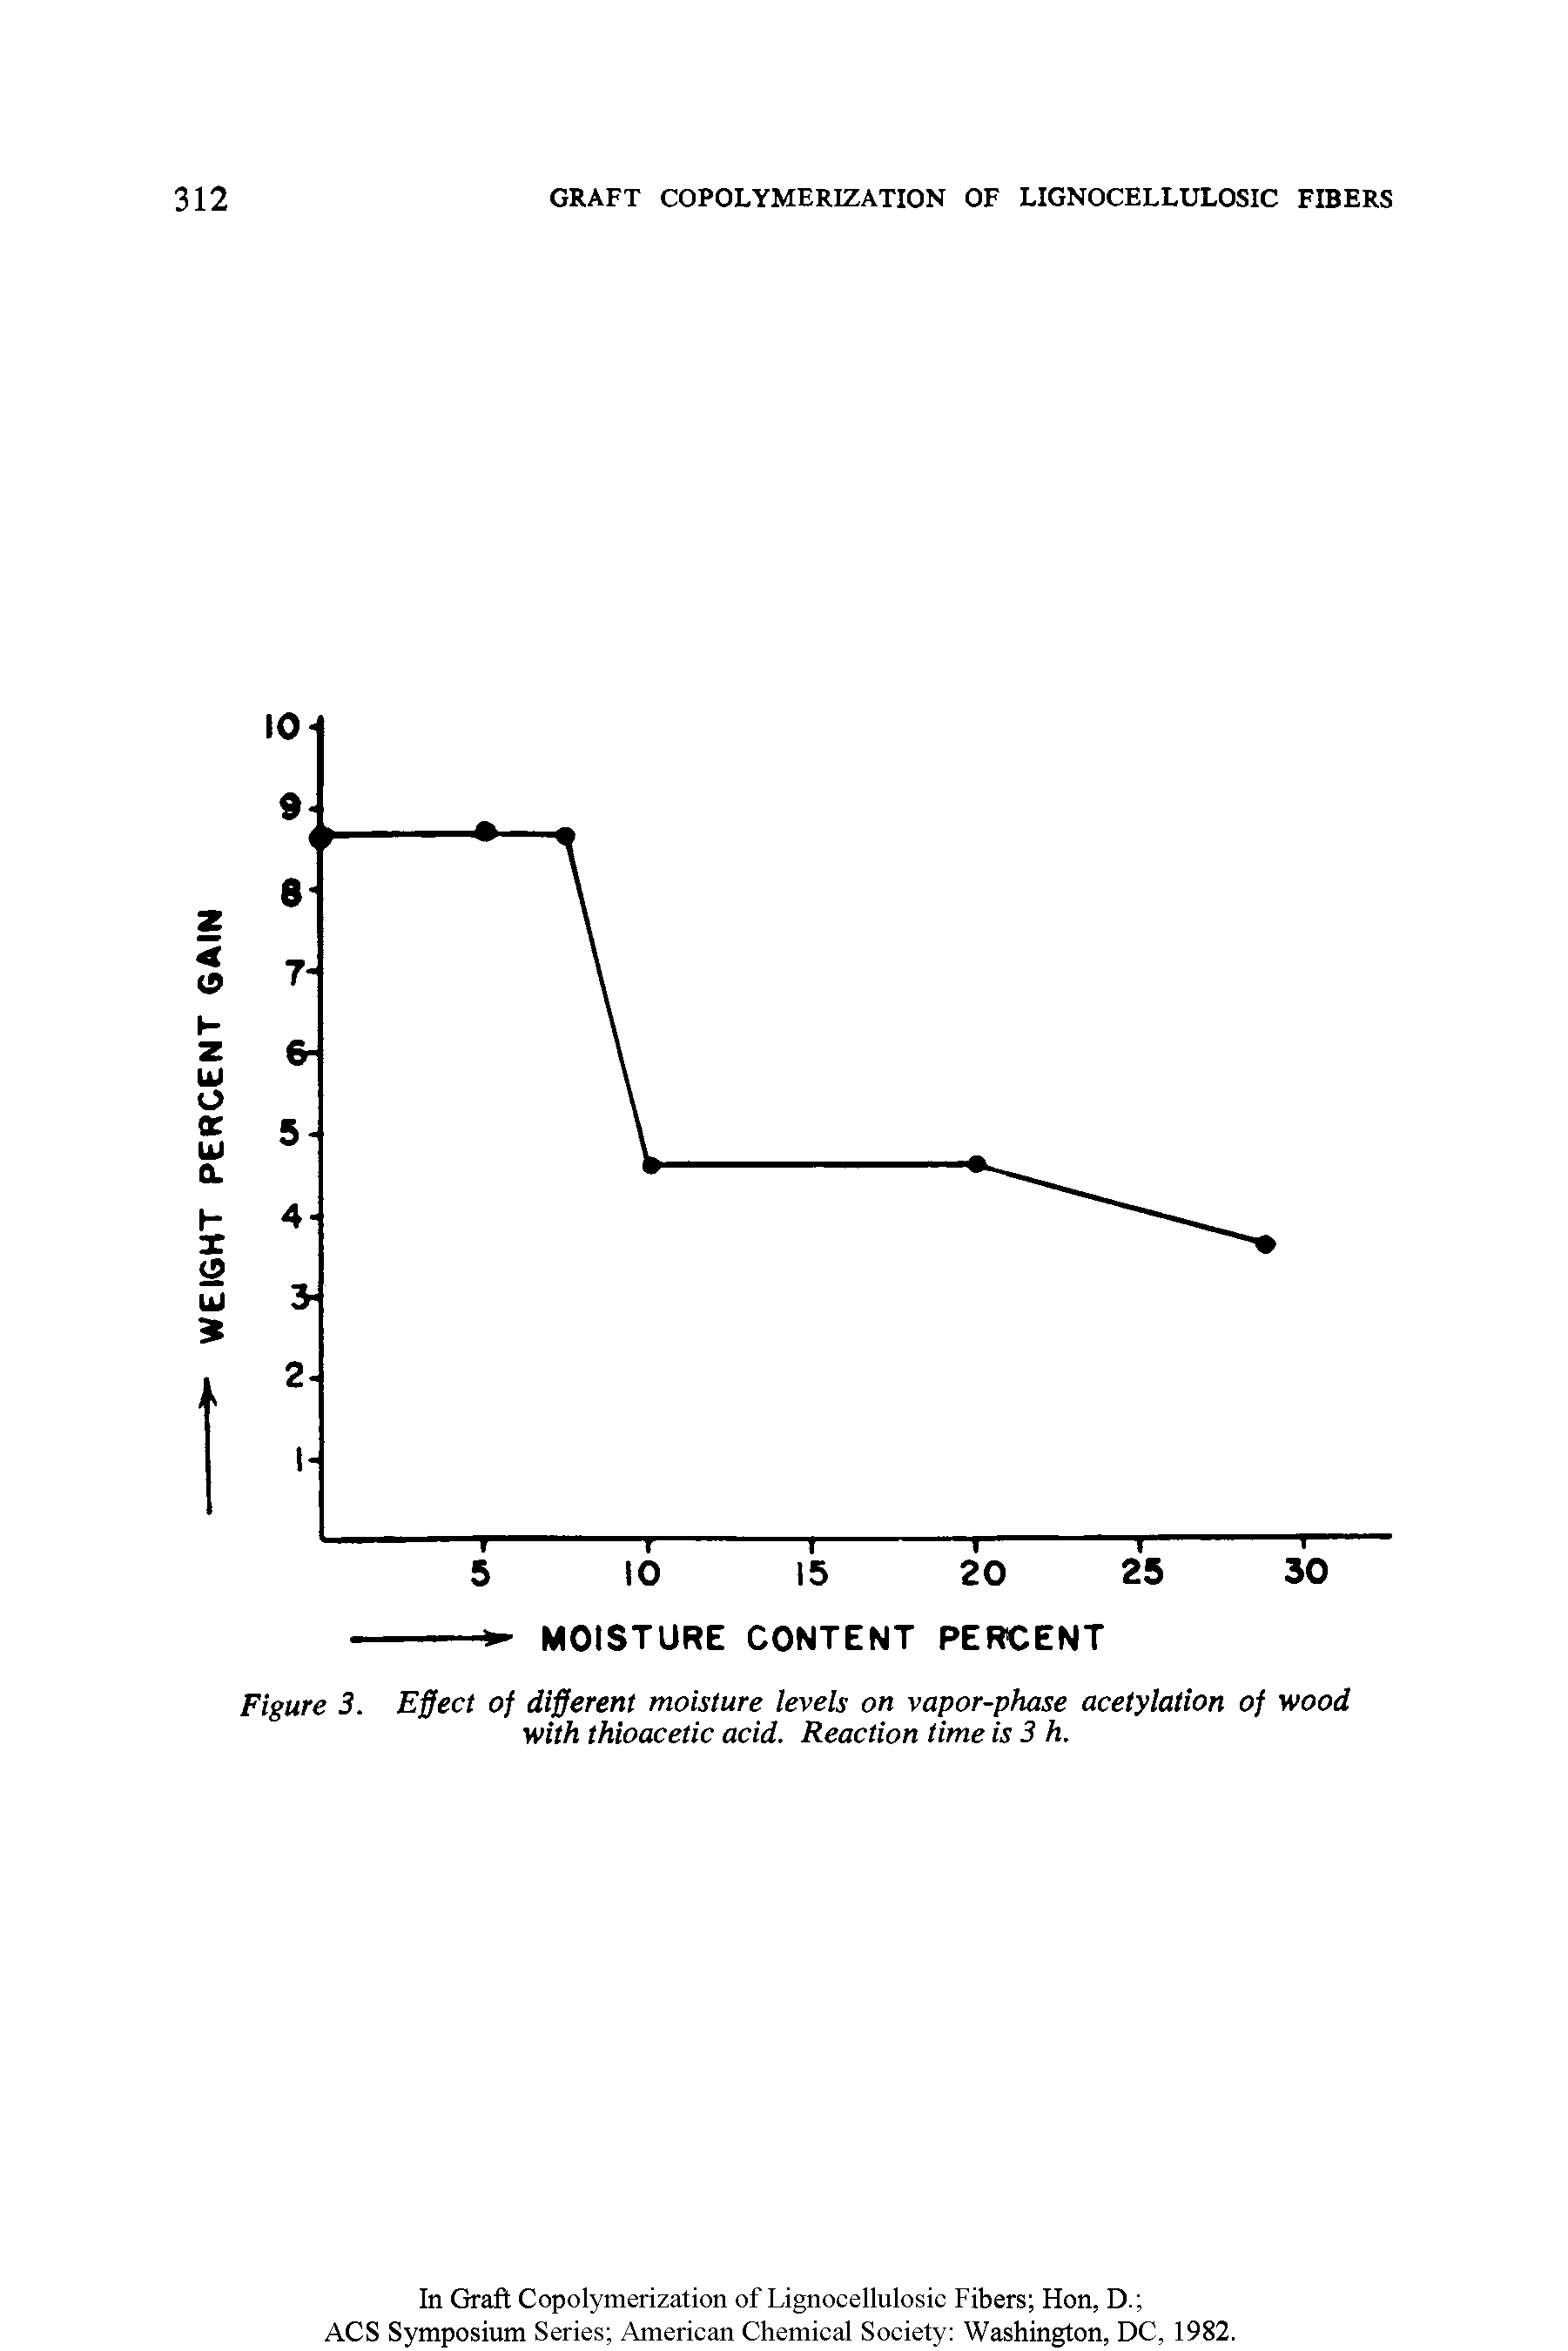 Figure 3. Effect of different moisture levels on vapor-phase acetylation of wood with thioacetic acid. Reaction time is 3 h.